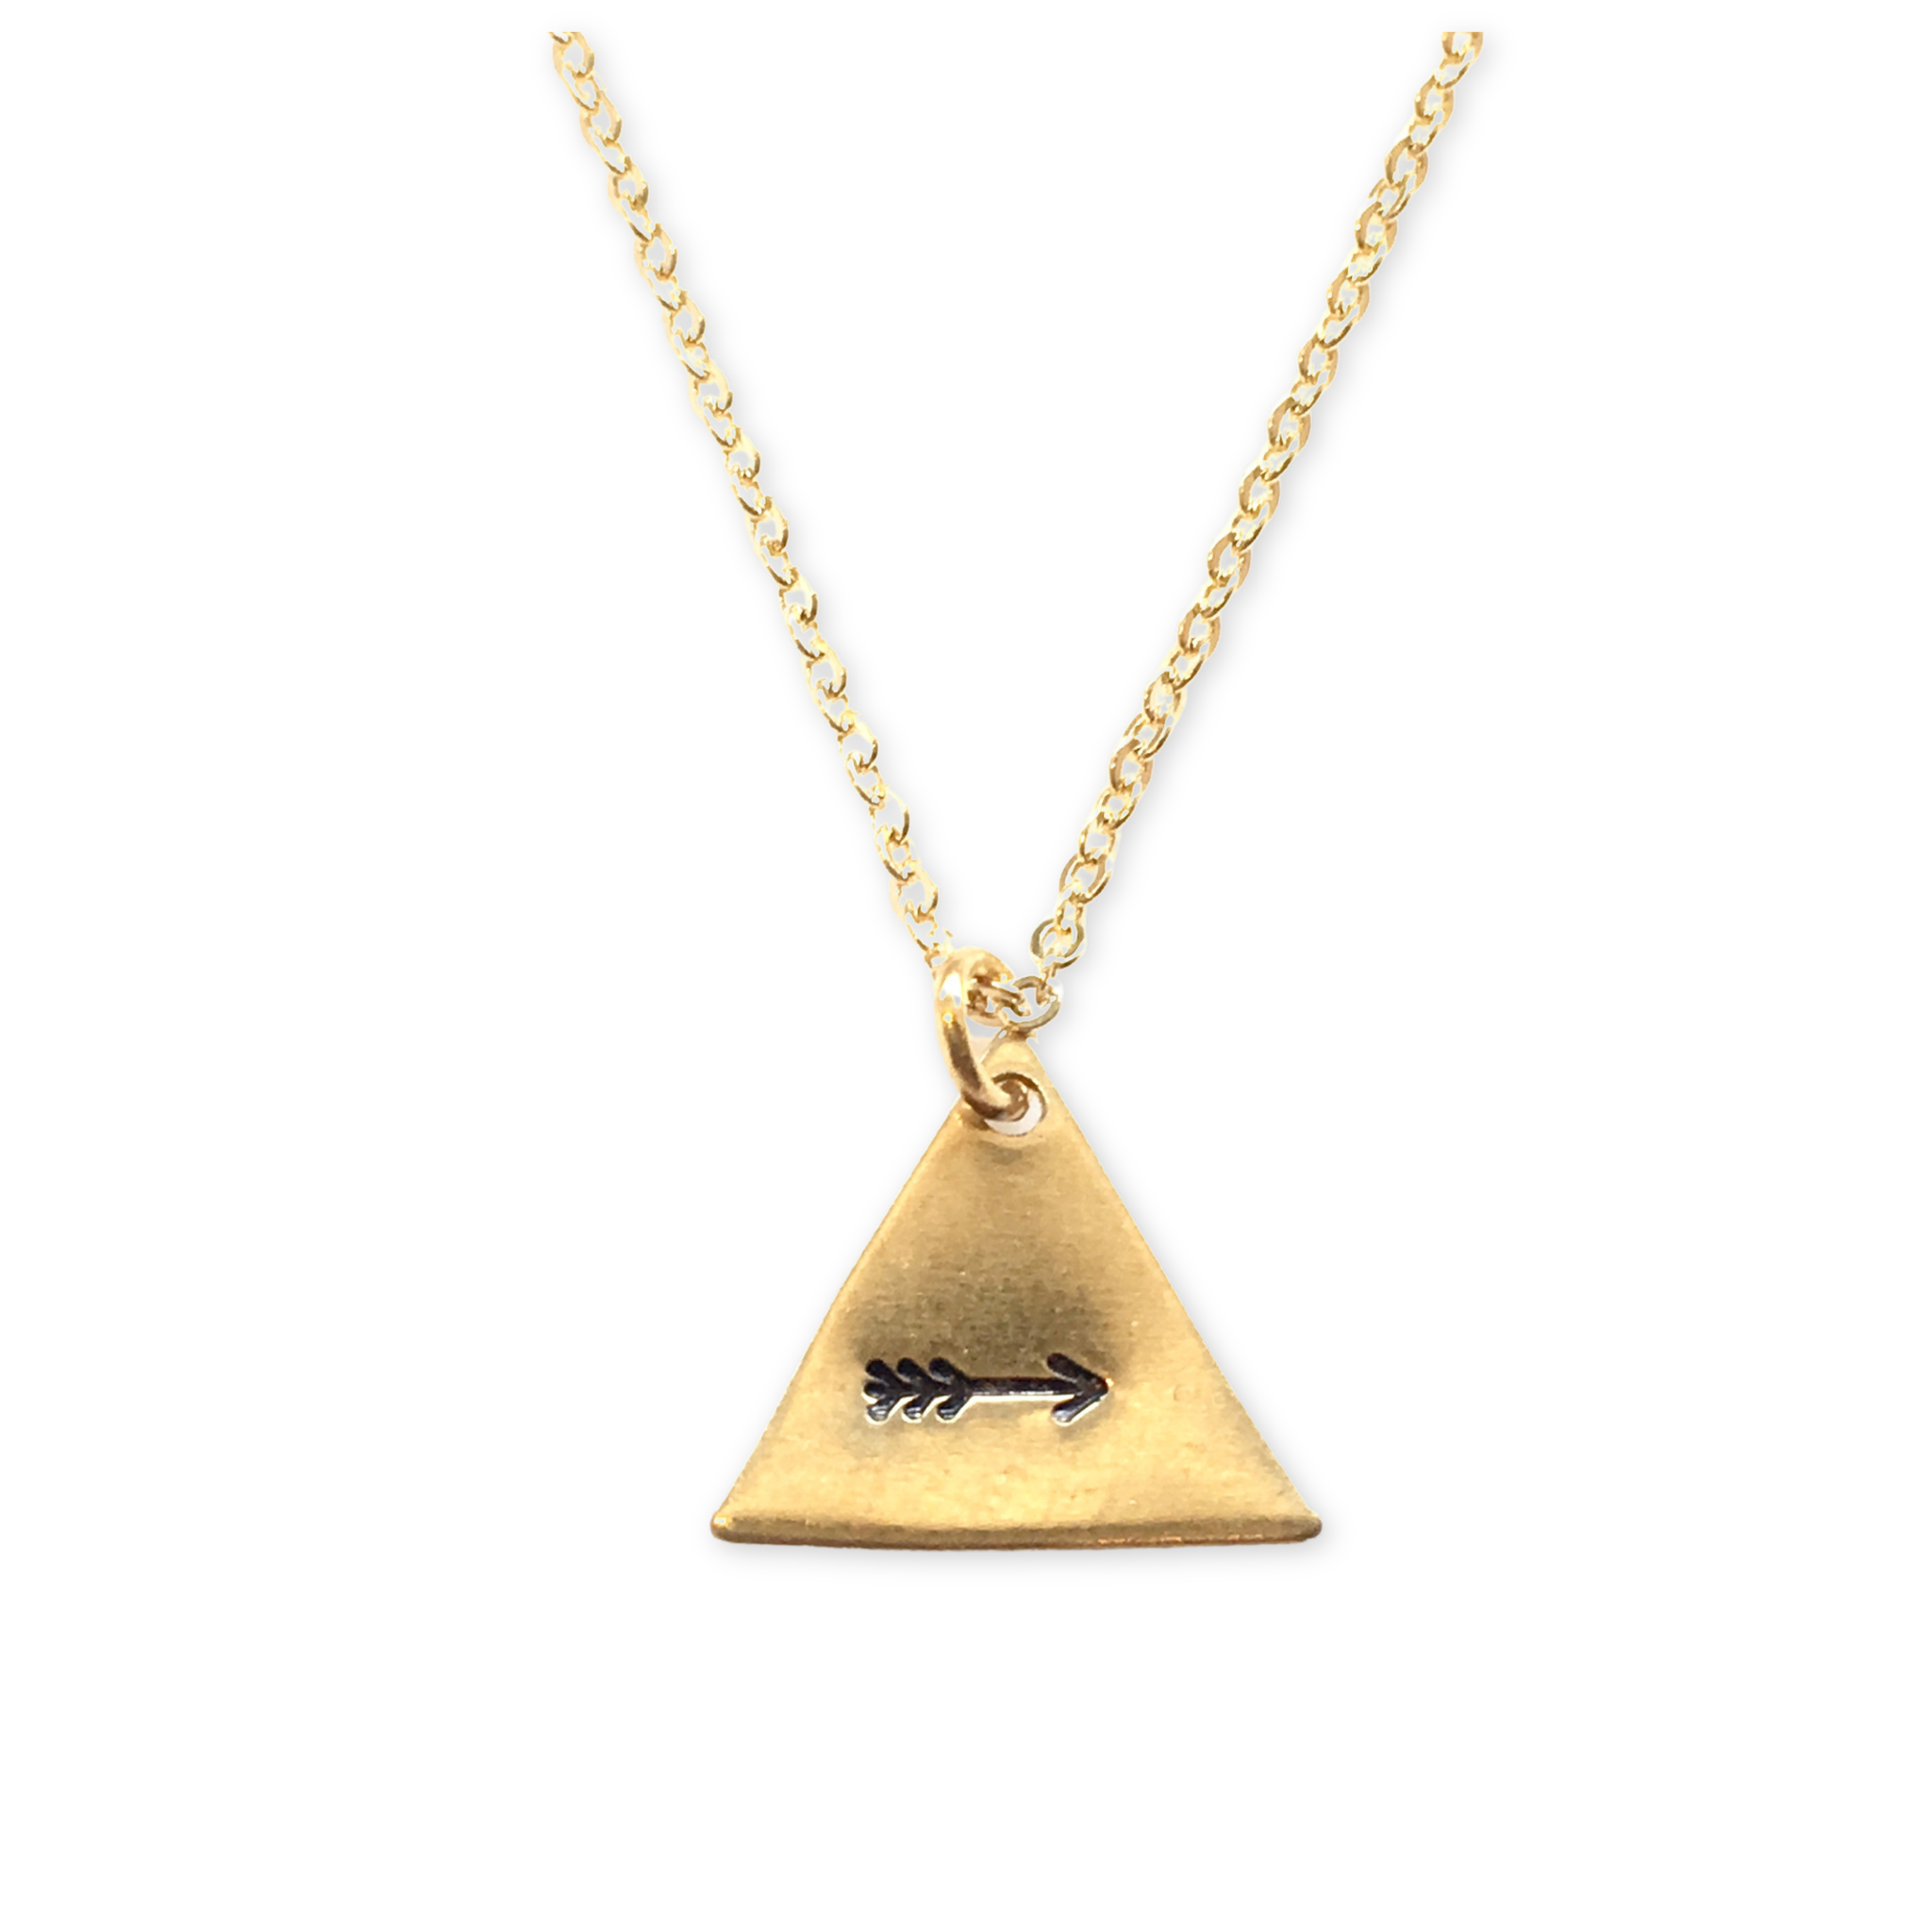 gold necklace with a triangle pendant and a stamped arrow